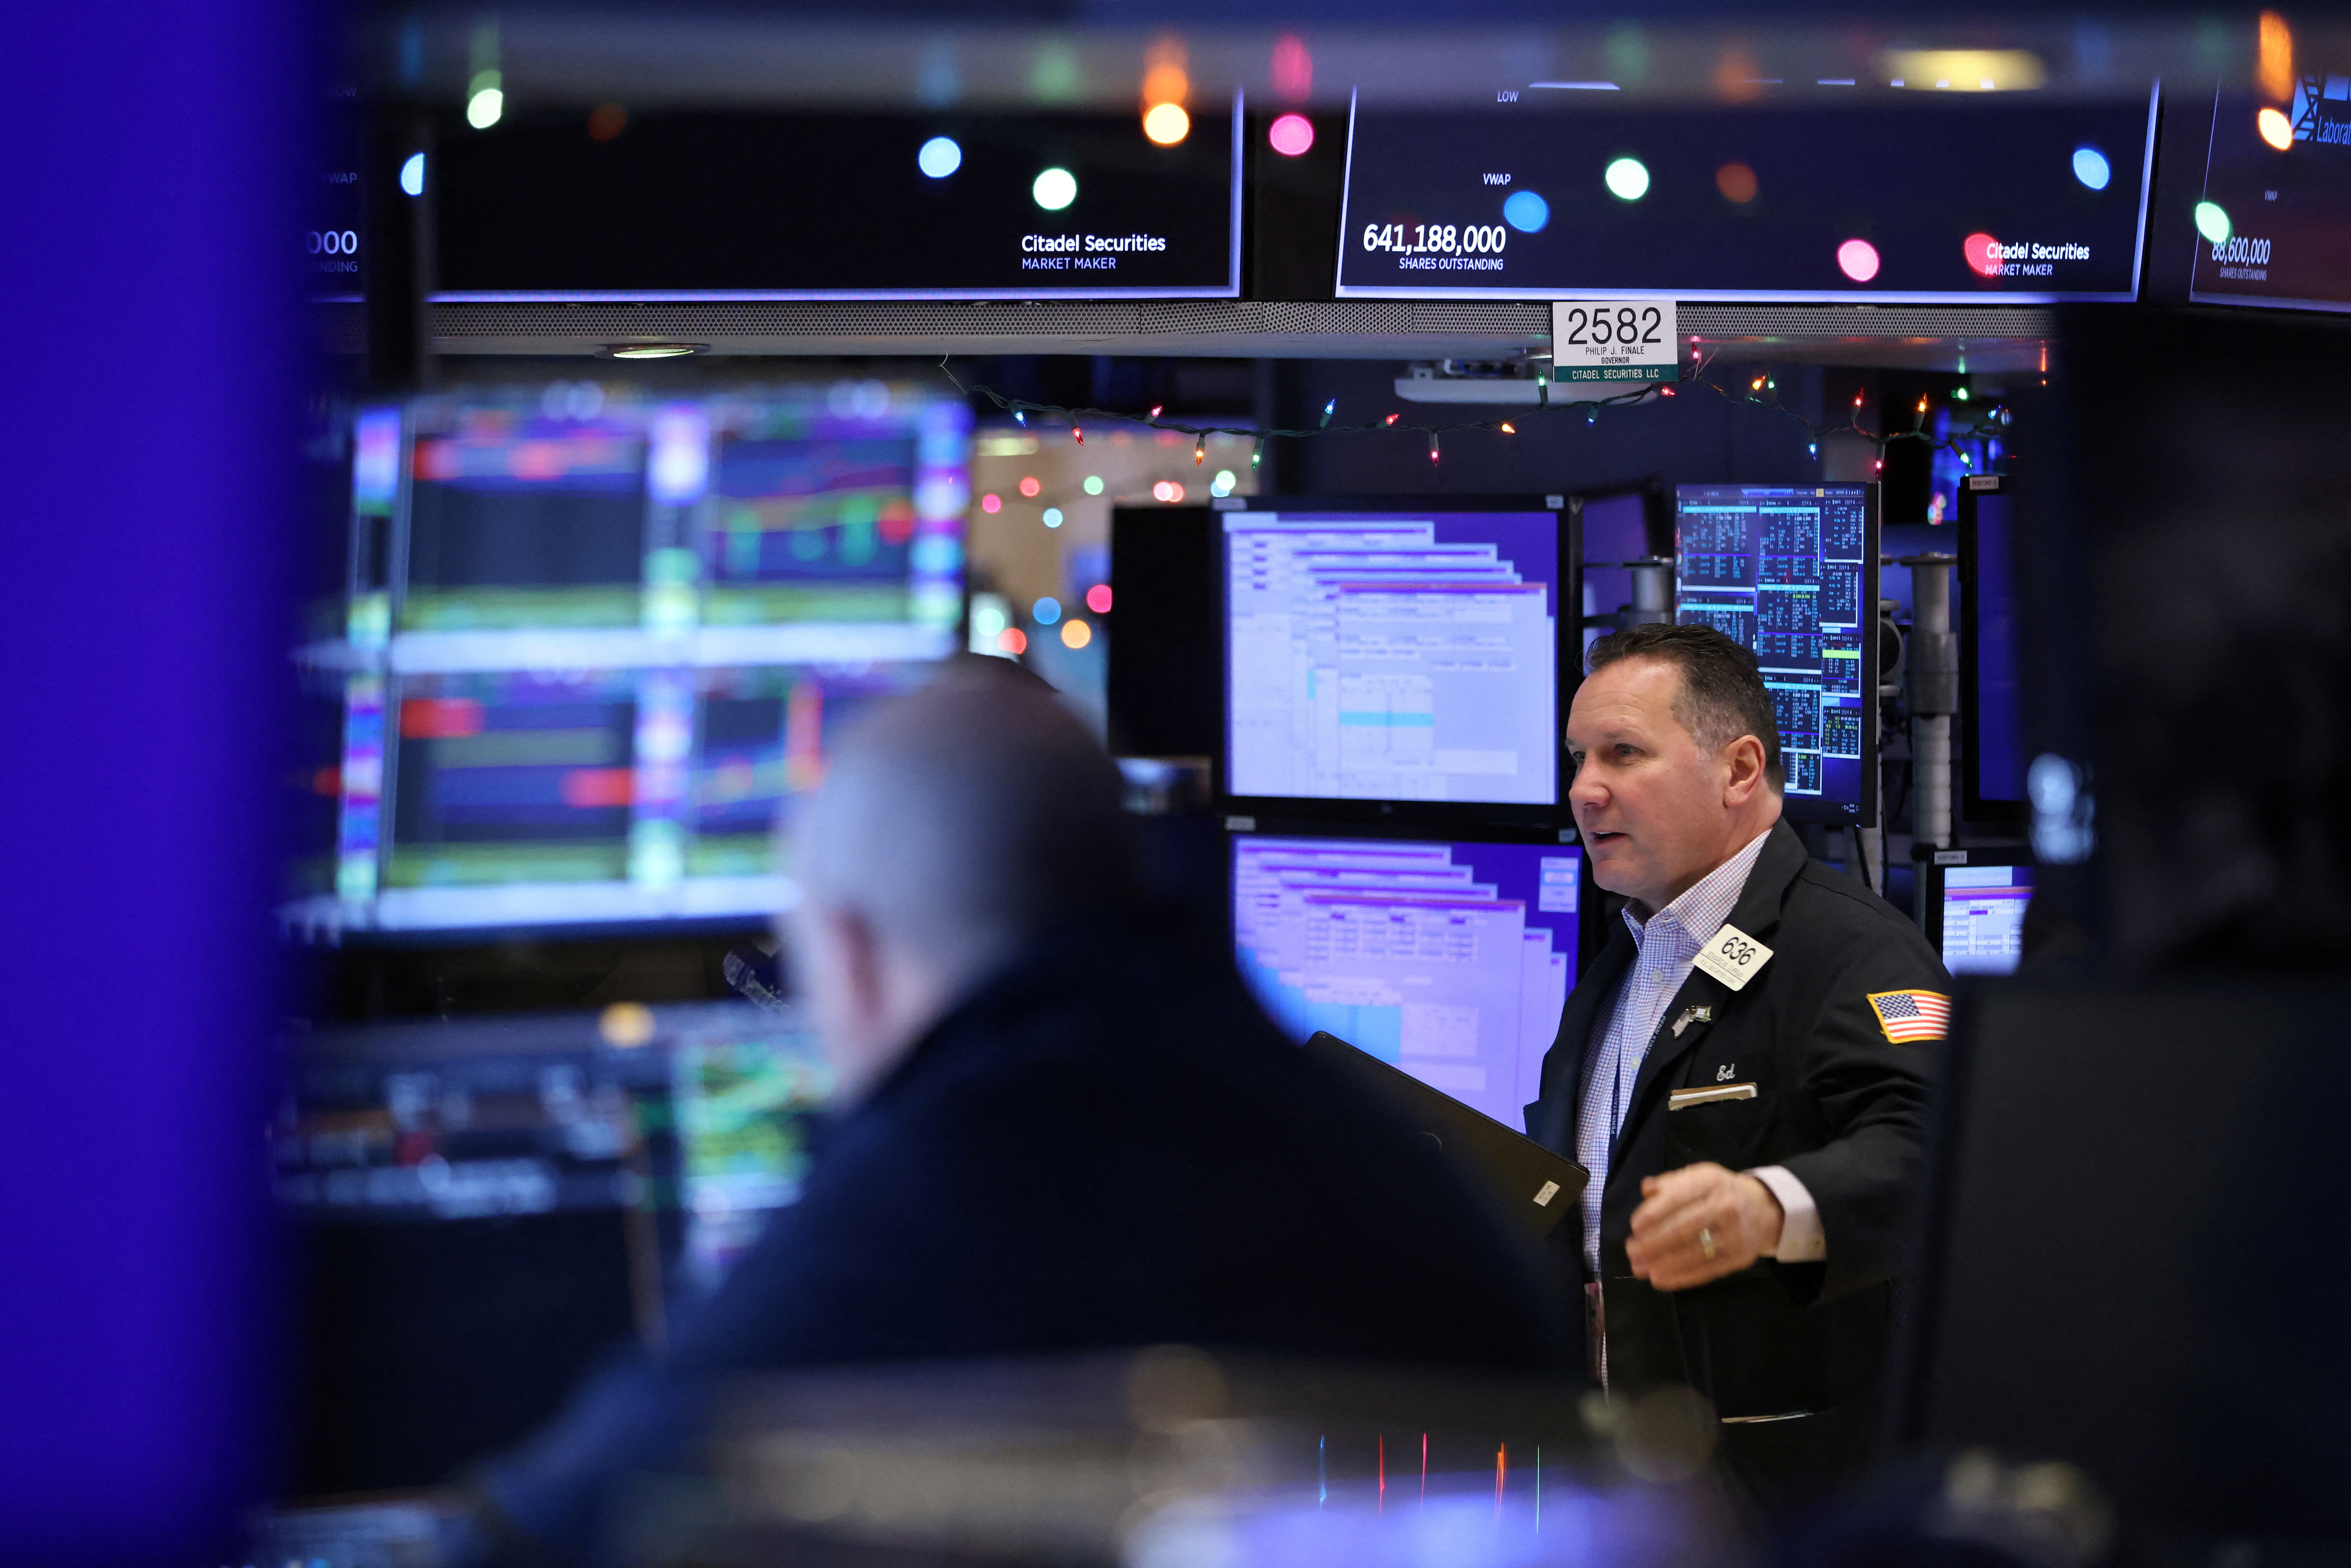 A trader works on the floor of the New York Stock Exchange (NYSE) in New York